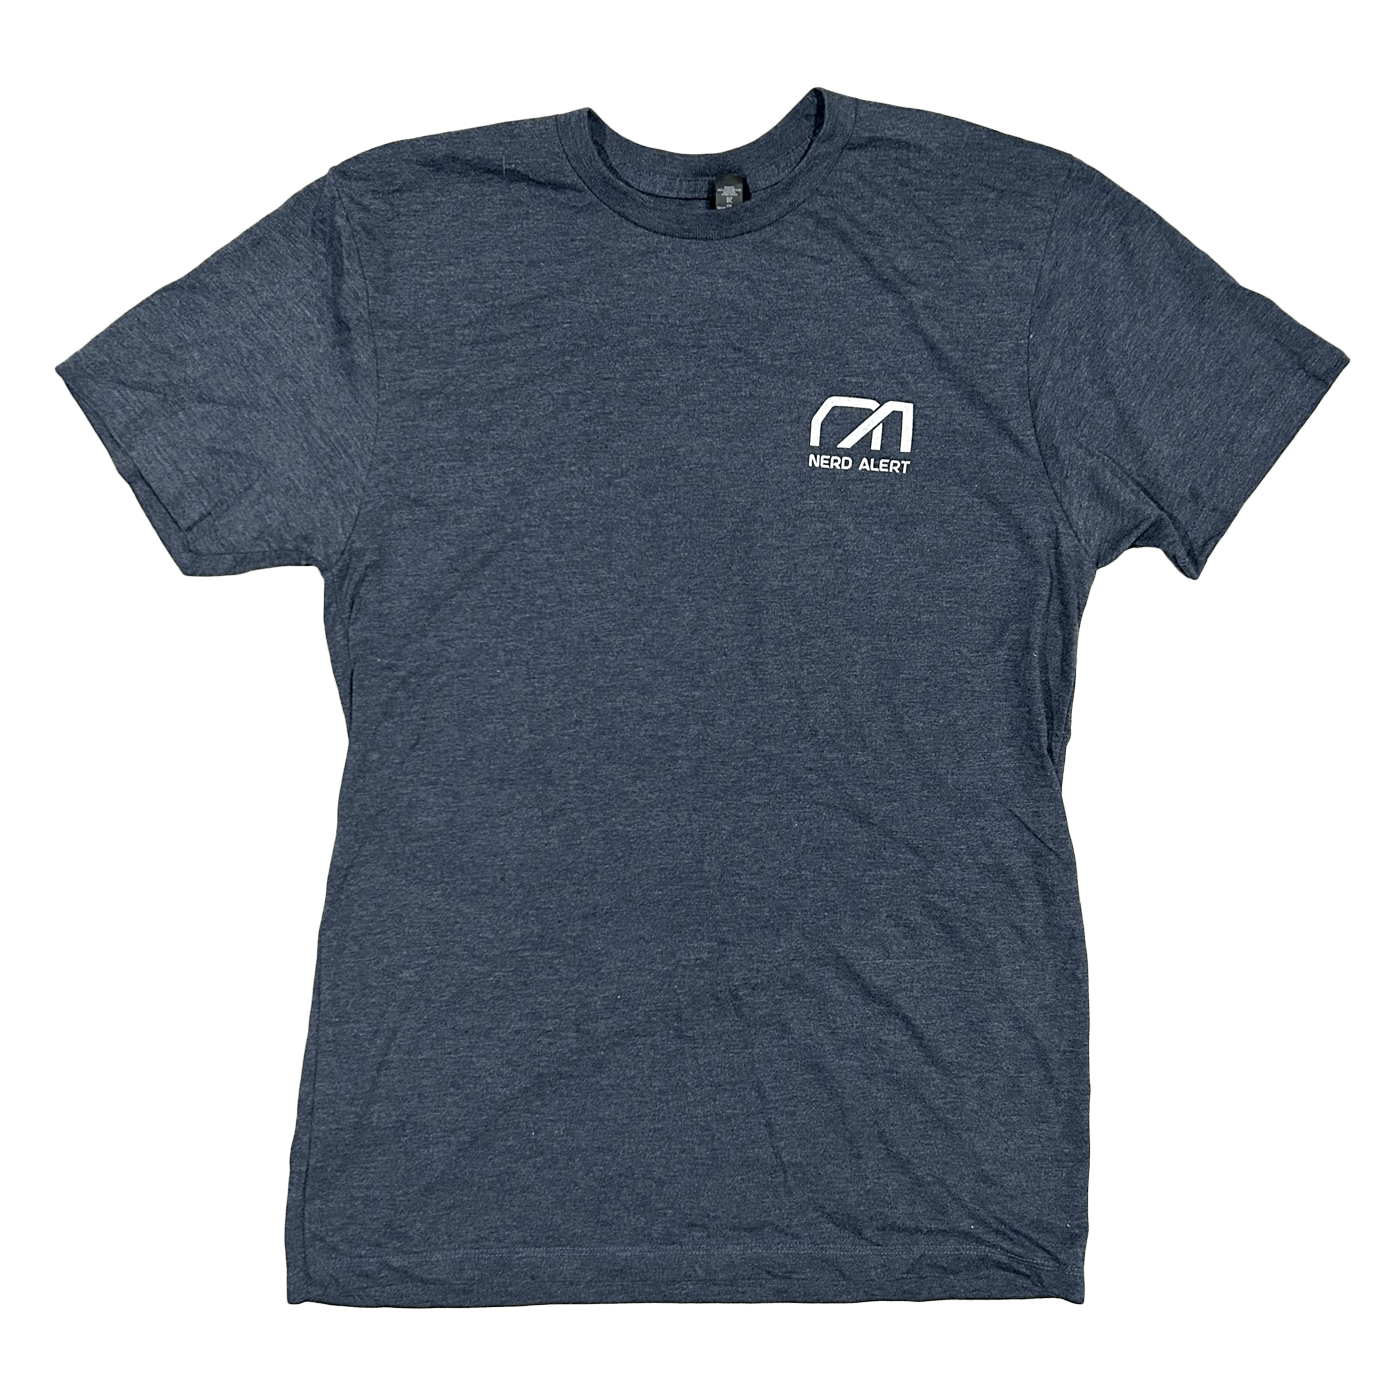 A navy blue T-Shirt with the Nerd Alert logo on the front